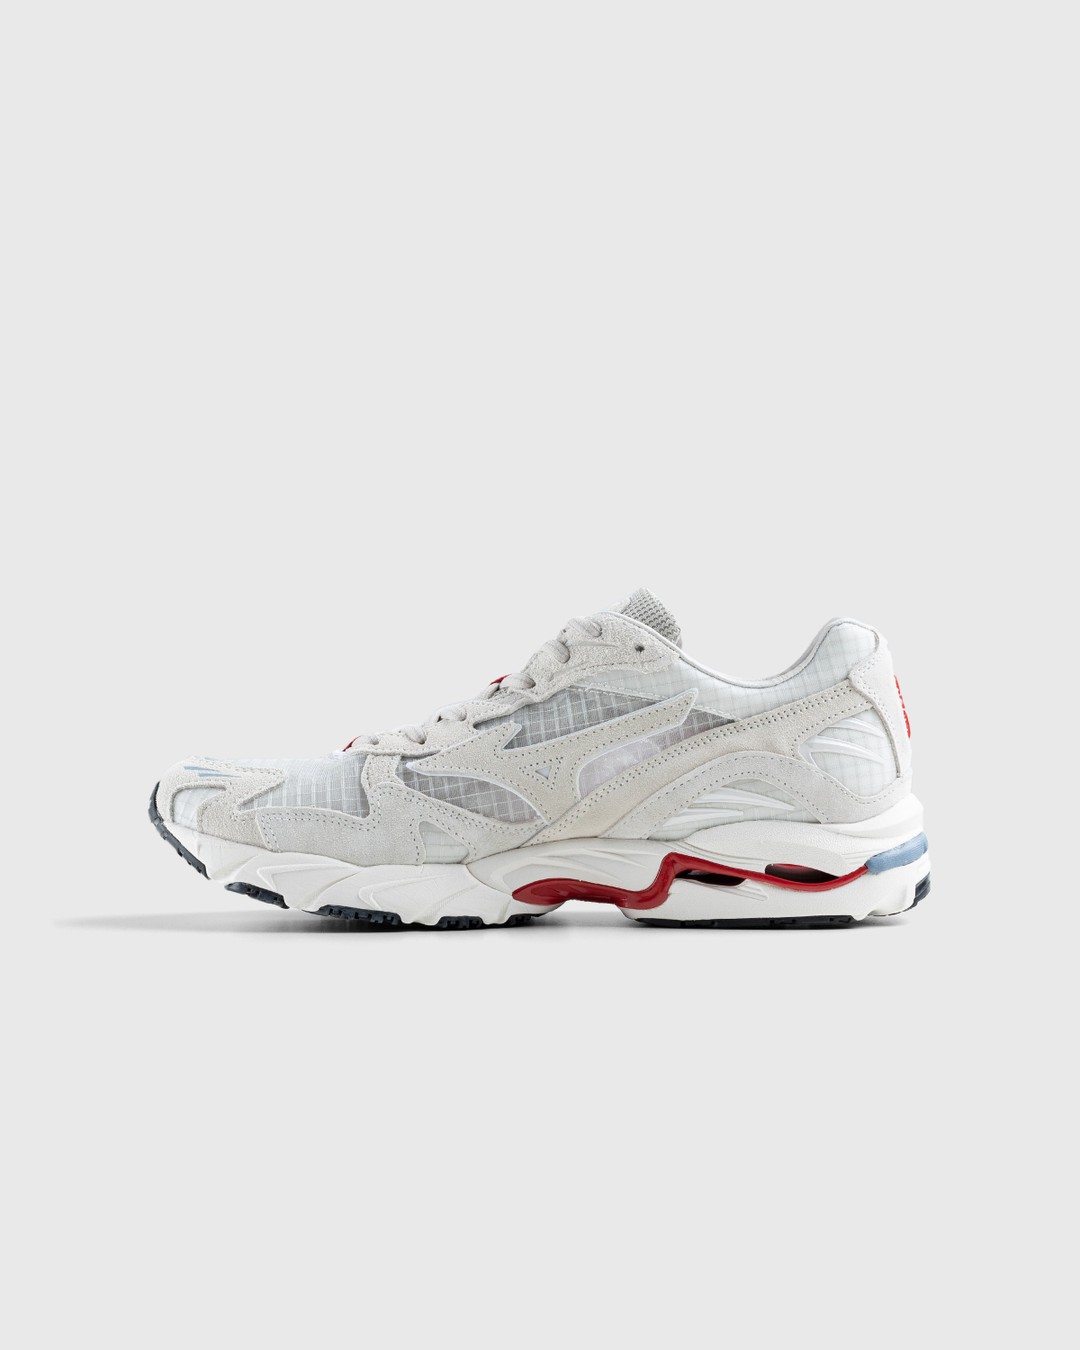 Mizuno x Highsnobiety – Wave Rider 10 White/Red - Low Top Sneakers - Grey - Image 2